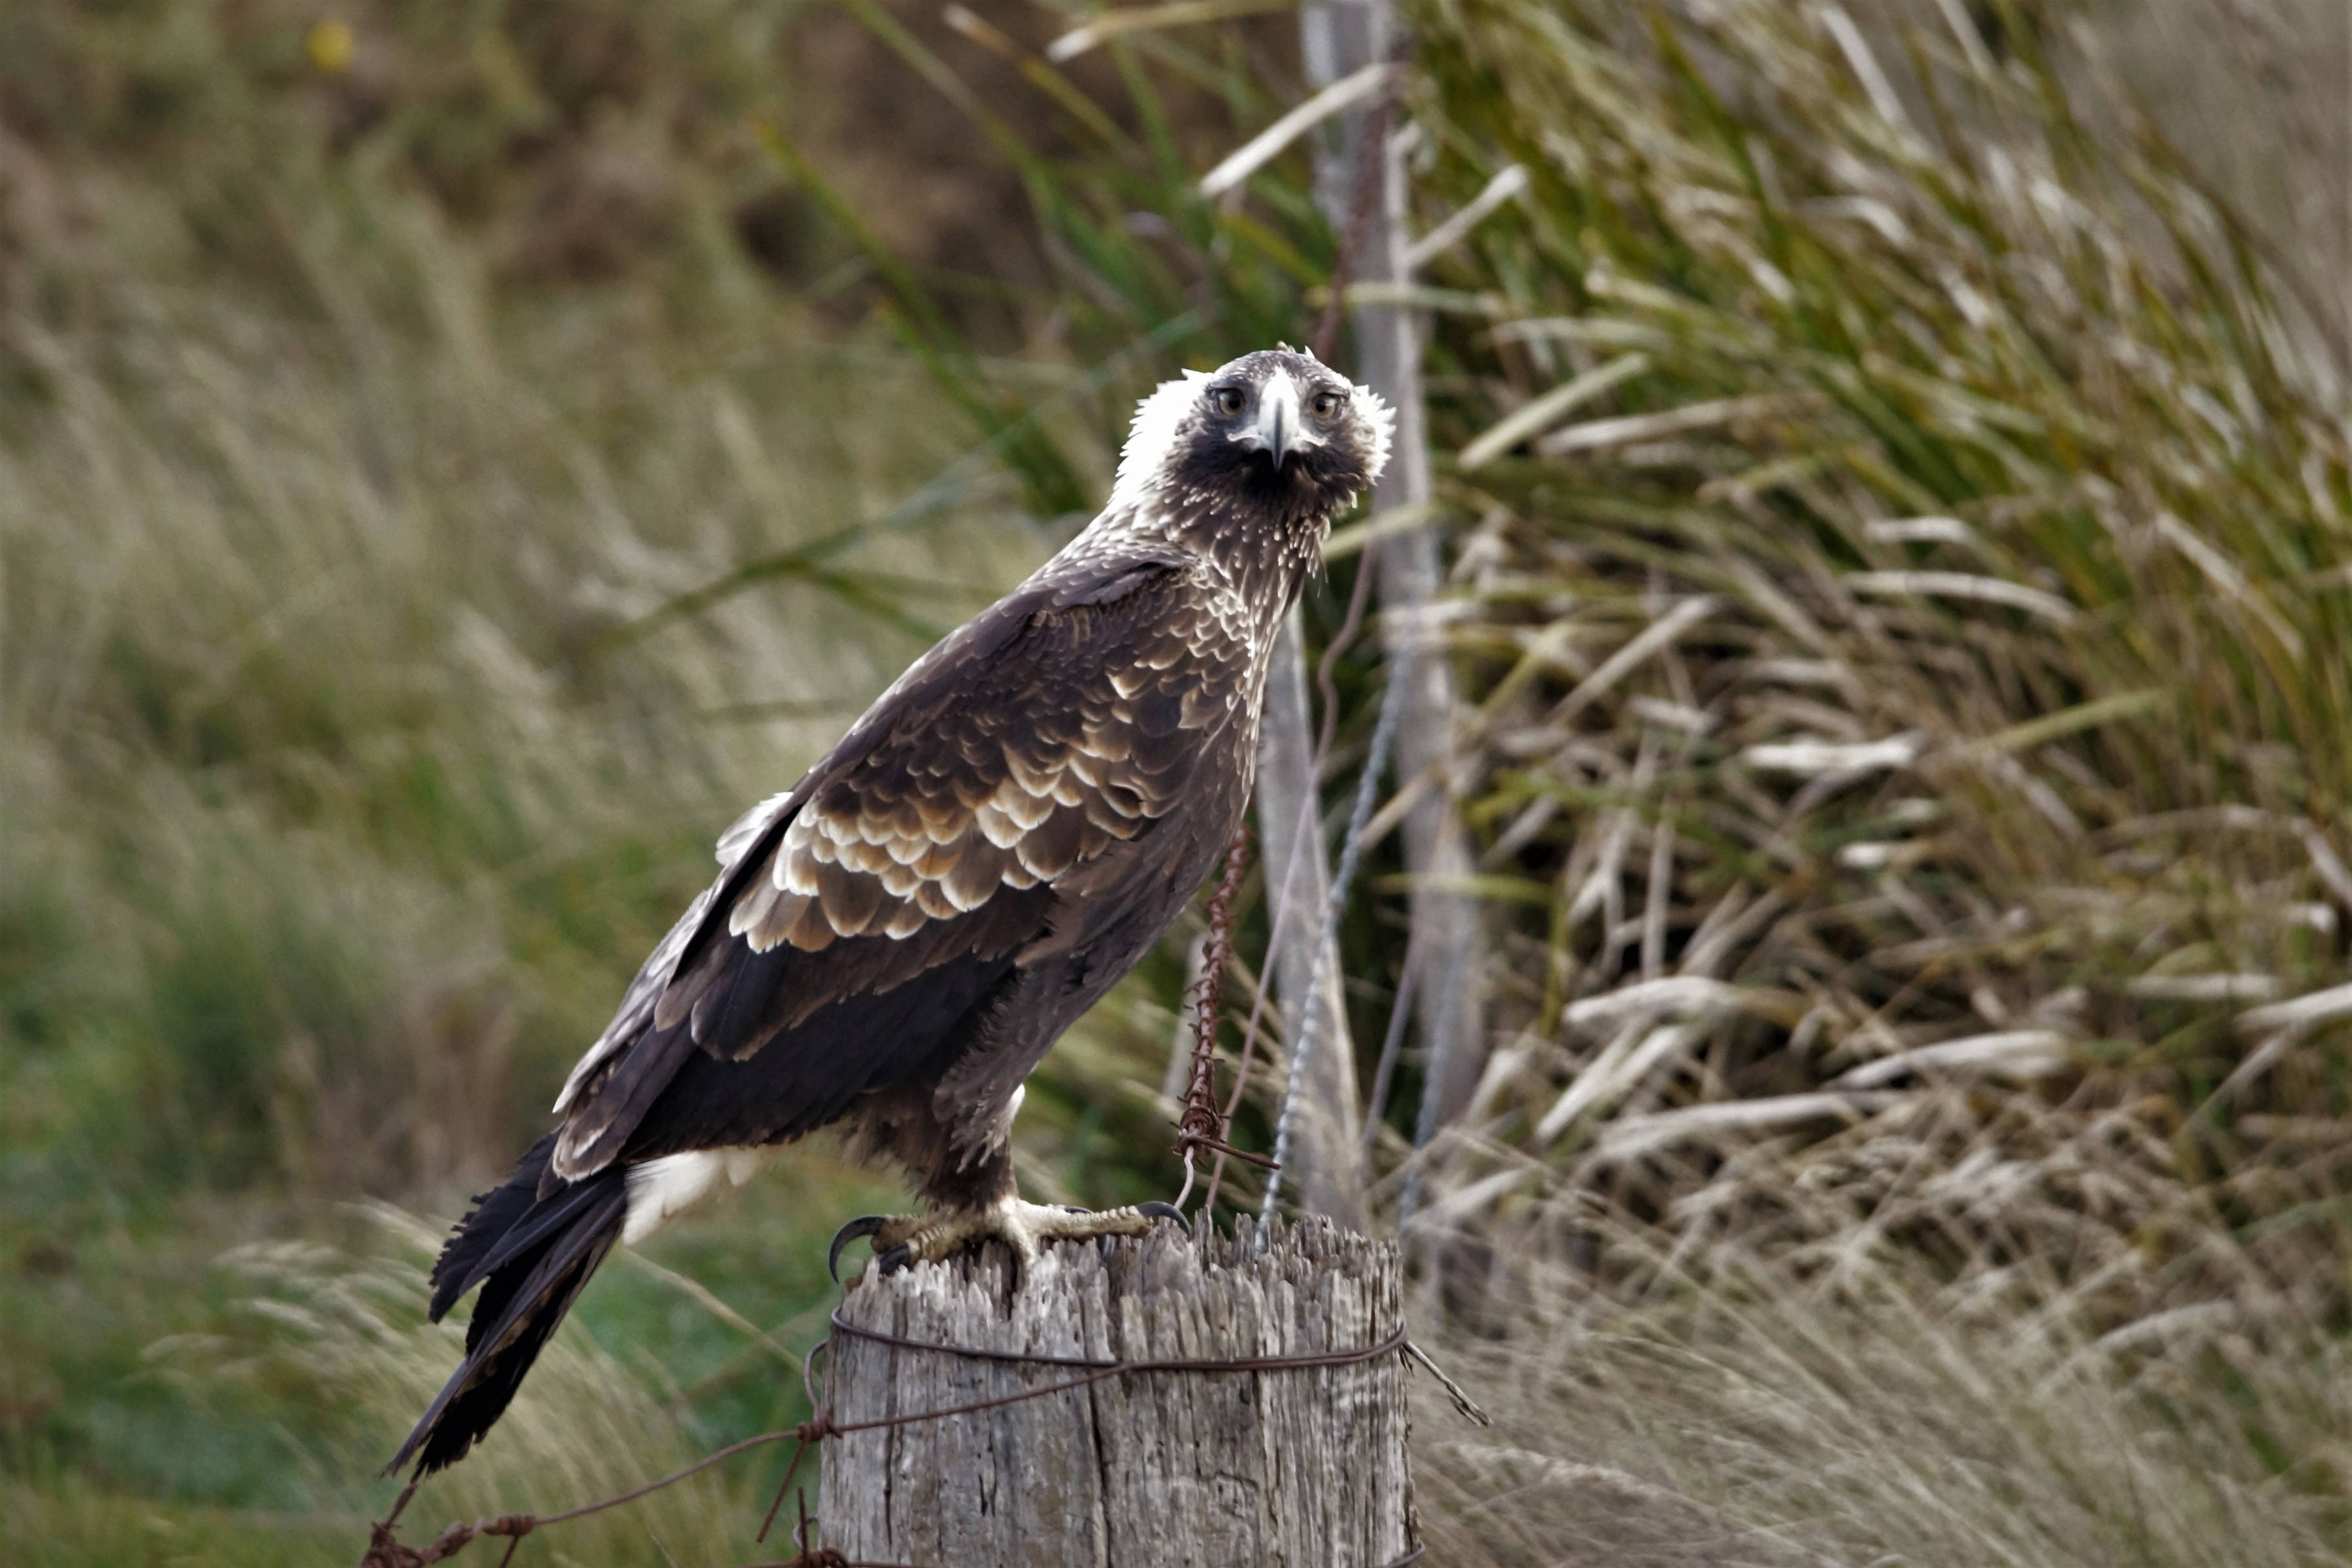 A wedge-tailed eagle stands on an old fencepost, and looks straight at the camera. We can tell it is a young bird due to the pale feathers at the nape of its neck, which are backlit by the sun. Photo: Kawinwit Kittipalawattanapol.